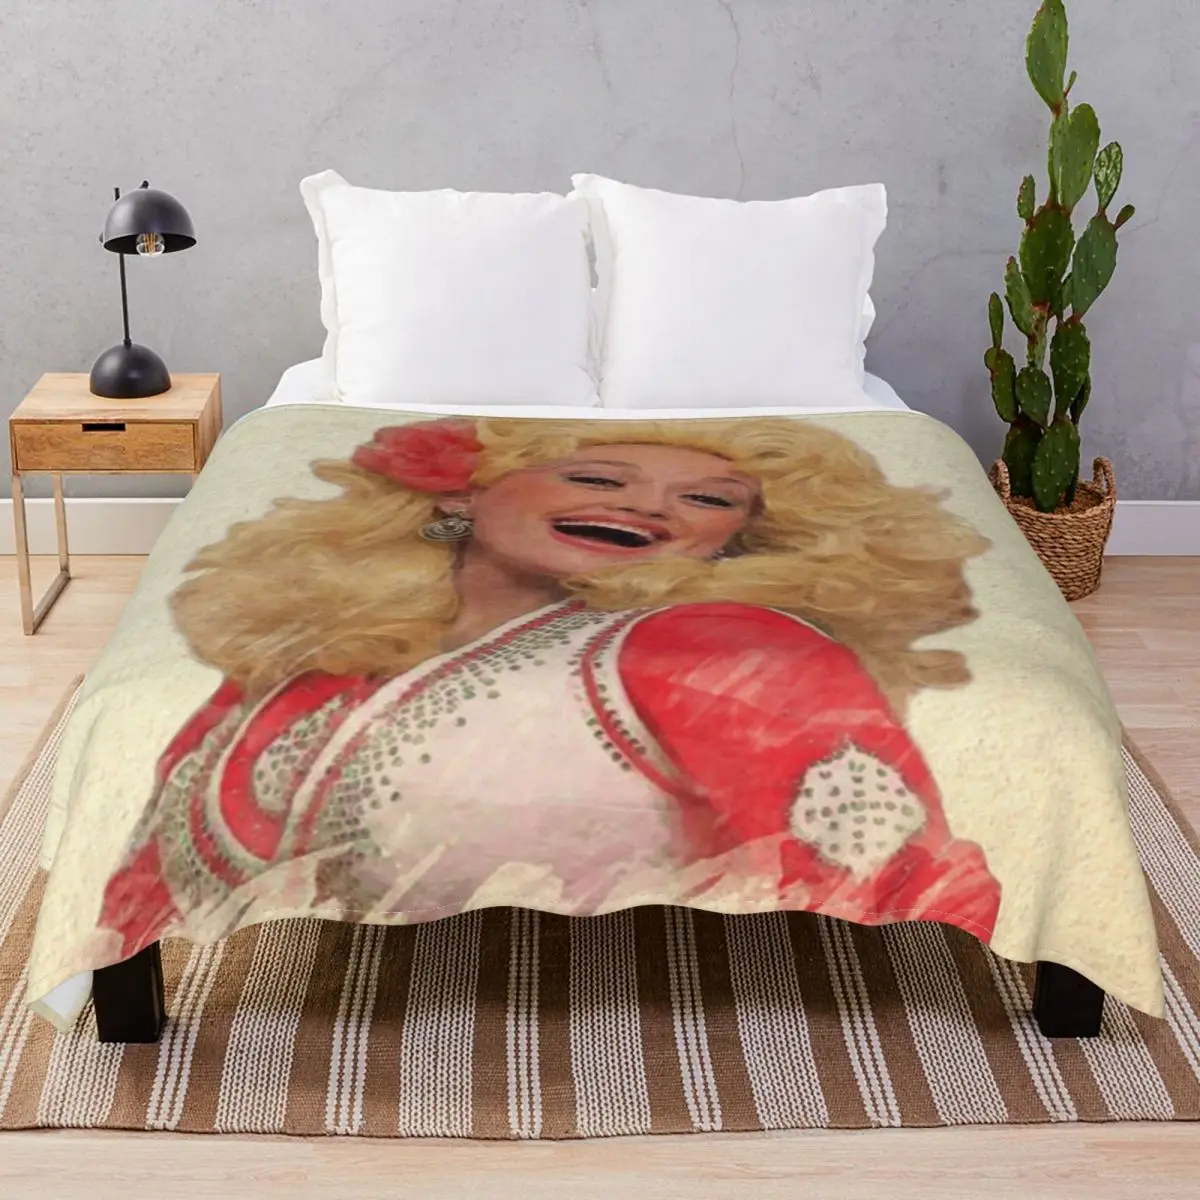 Dolly Parton Watercolor Blanket Coral Fleece Spring Autumn Breathable Throw Blankets for Bed Home Couch Camp Cinema